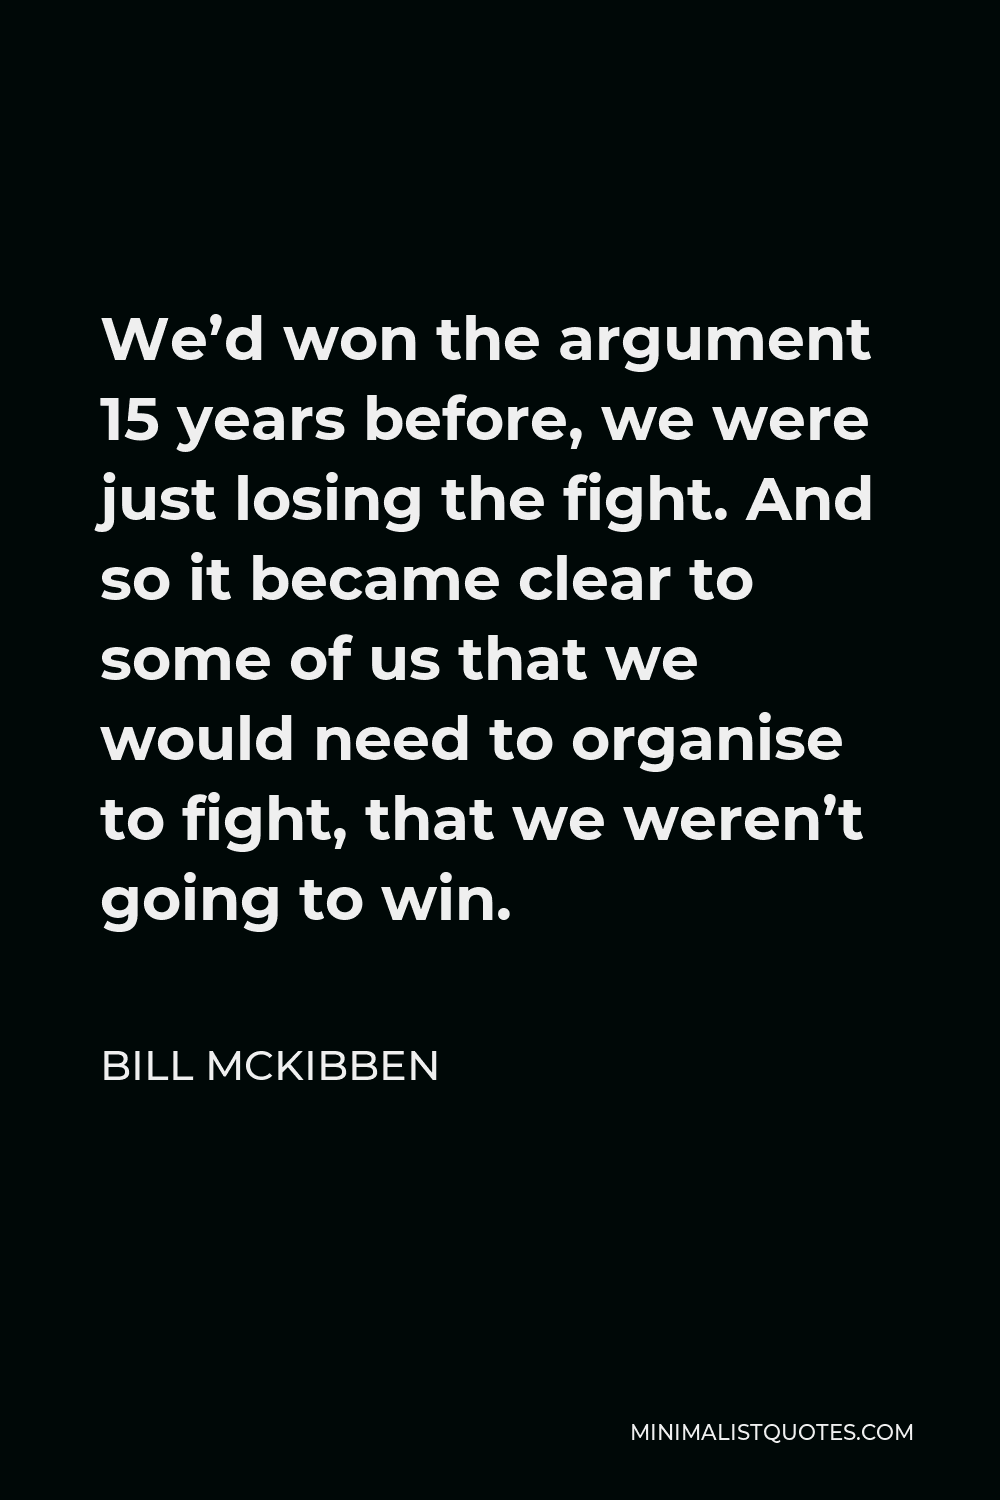 Bill McKibben Quote - We’d won the argument 15 years before, we were just losing the fight. And so it became clear to some of us that we would need to organise to fight, that we weren’t going to win.